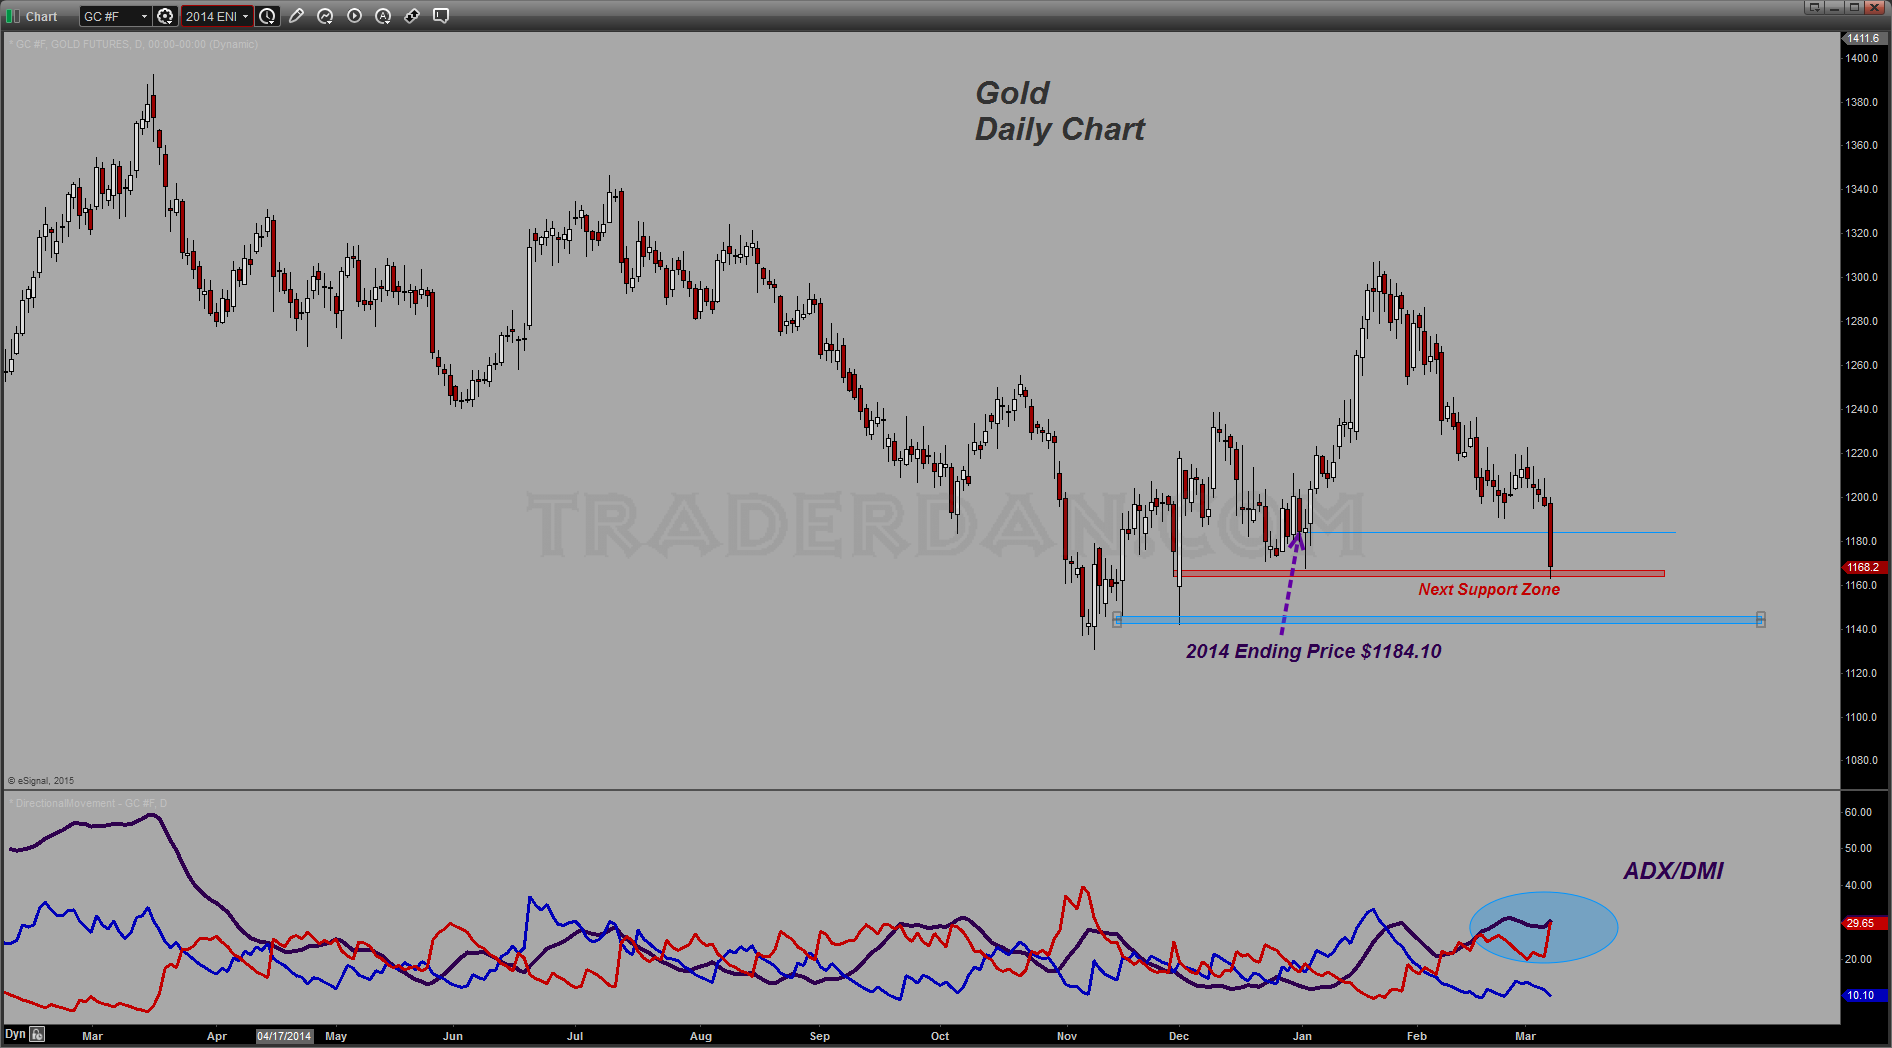 Gold Daily with 2014 Ending Price and ADX/DMI